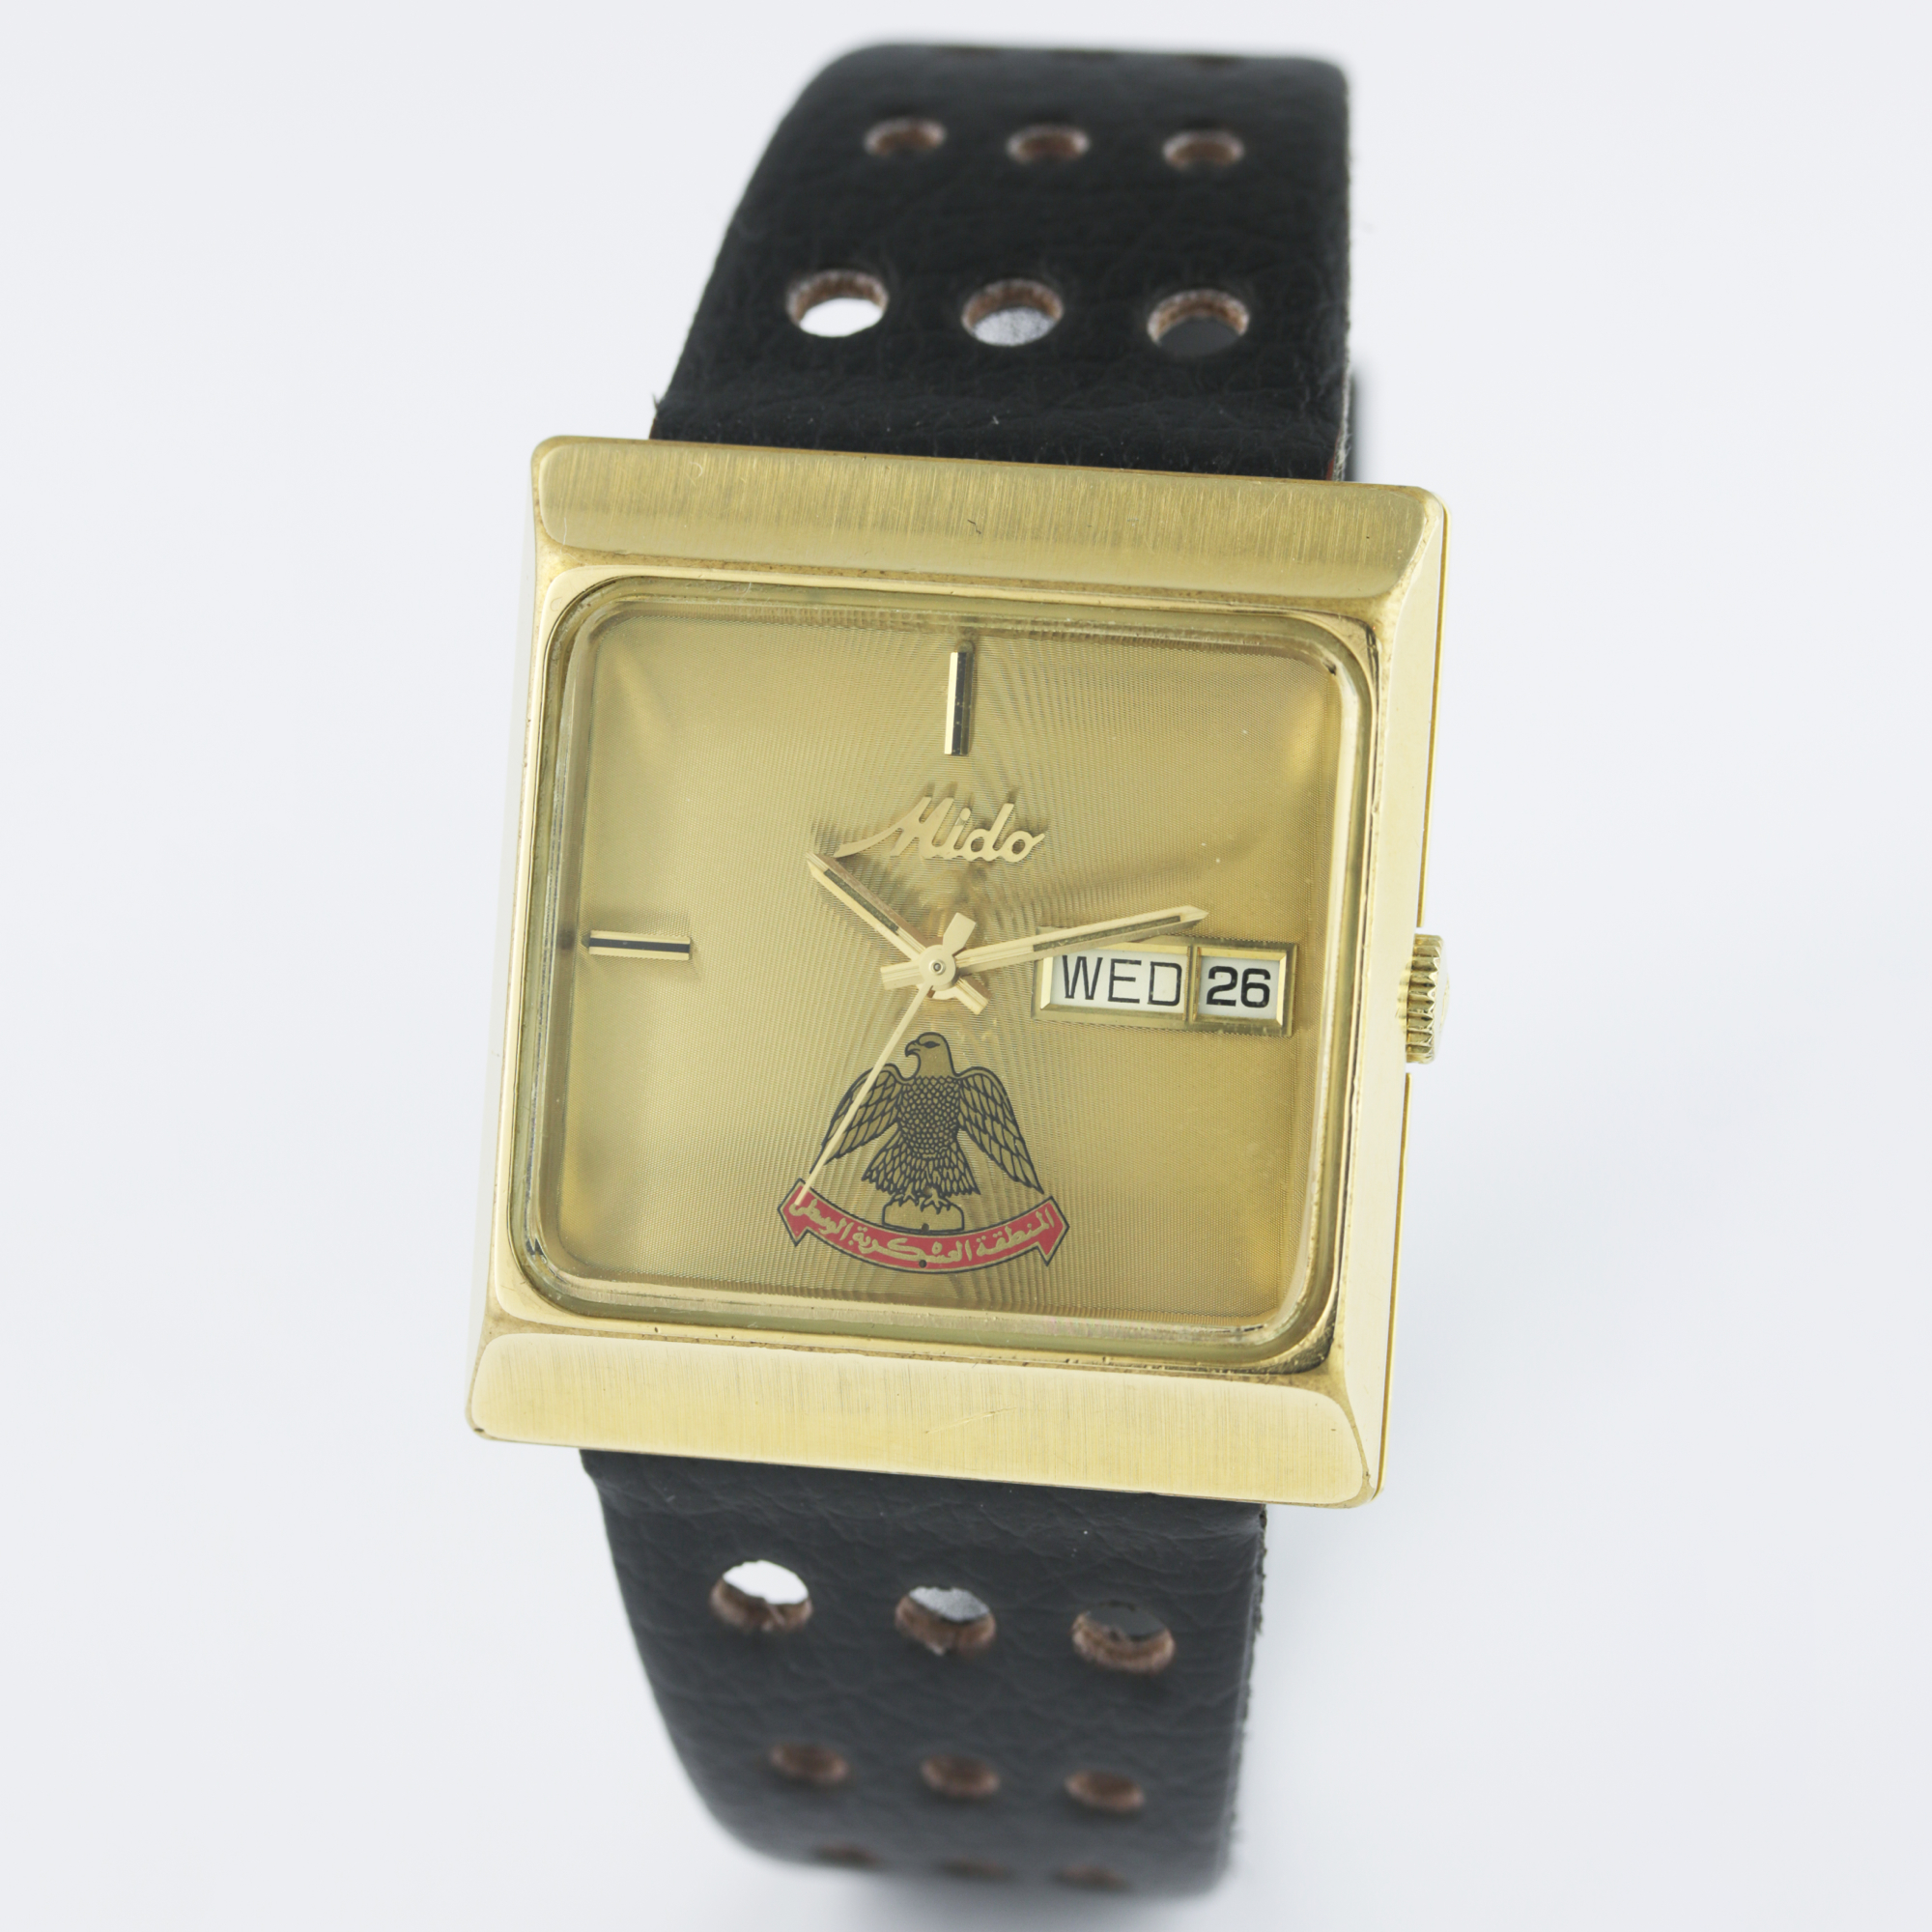 A GENTLEMAN'S GOLD PLATED MIDO AUTOMATIC WRIST WATCH CIRCA 1980s, COMMISSIONED BY THE UAE CENTRAL - Image 2 of 6